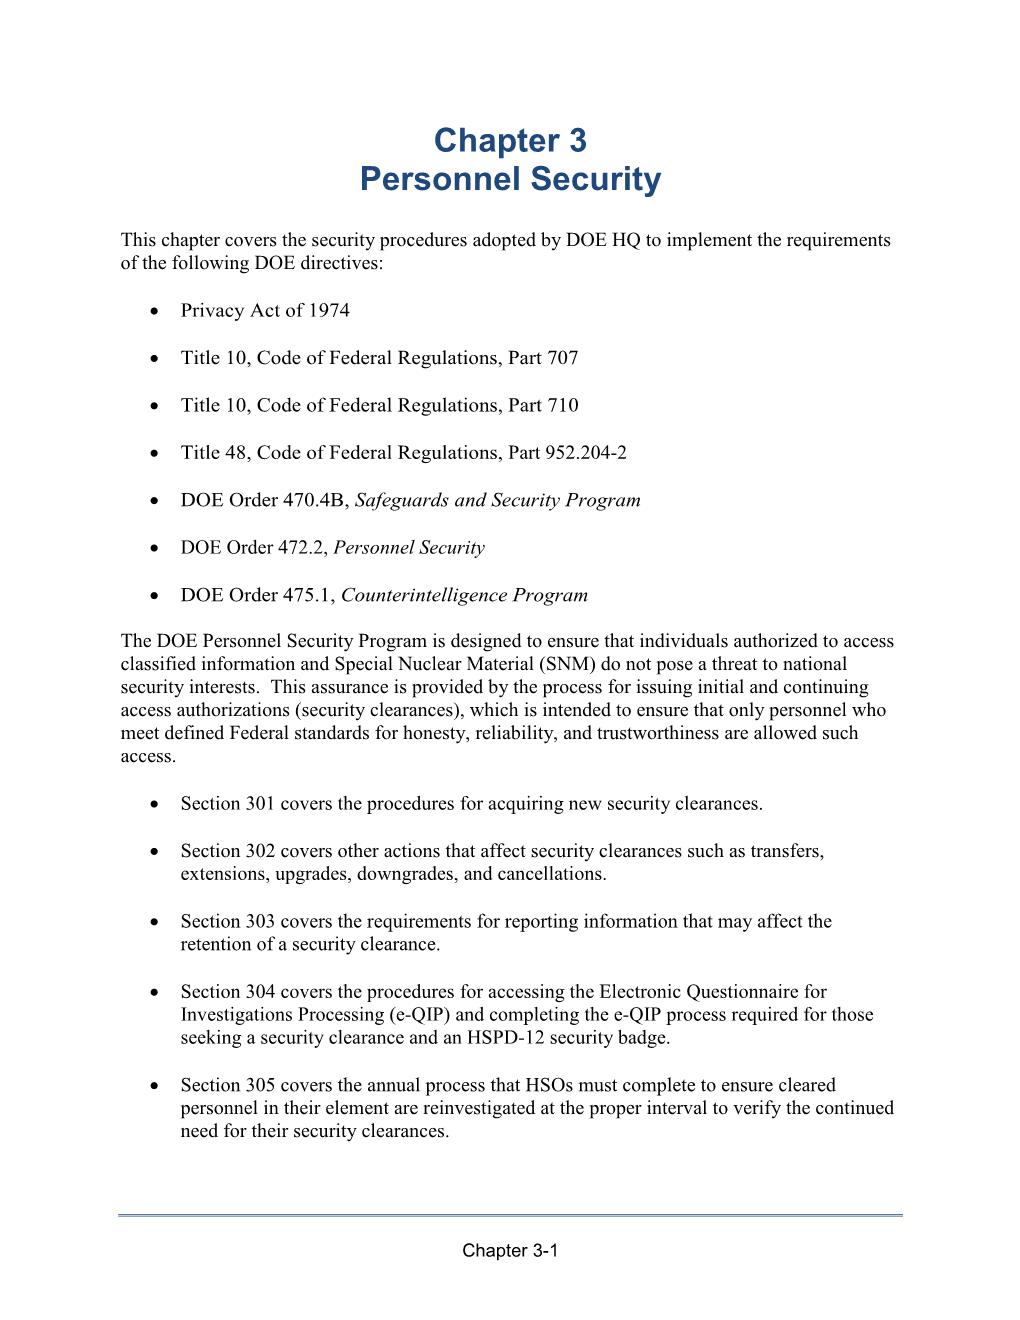 Chapter 3 Personnel Security